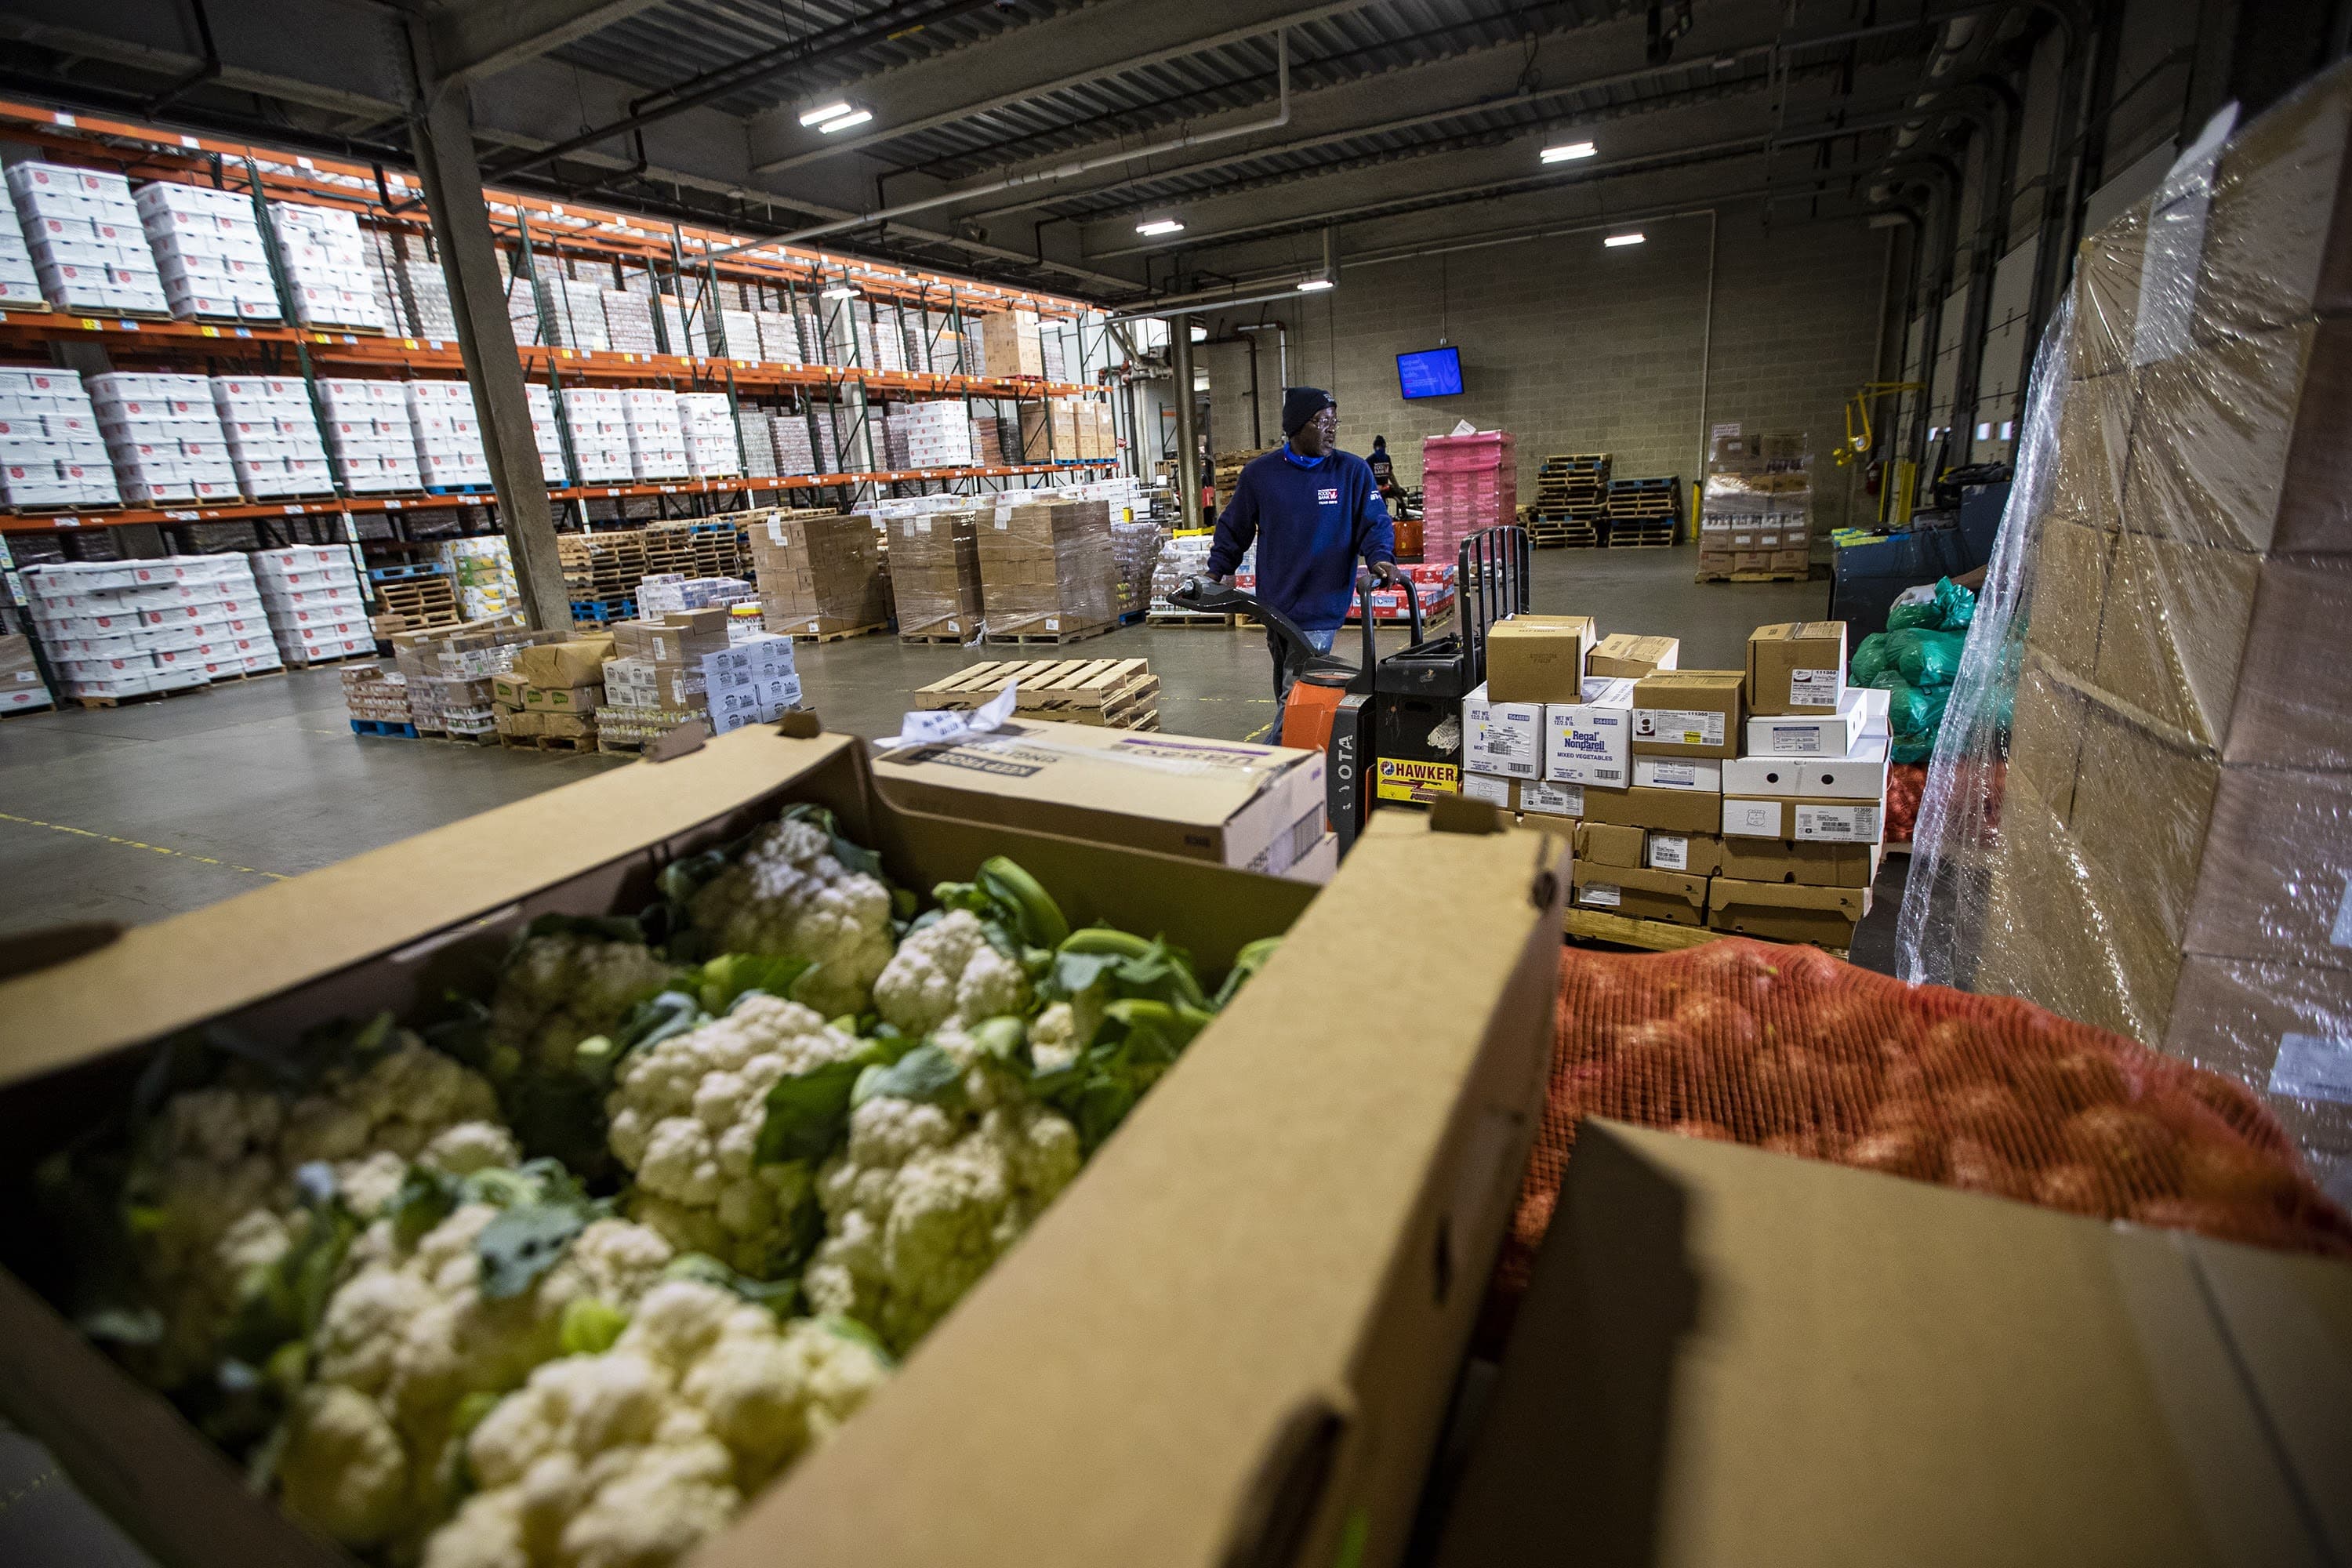 Mass. Food Banks Brace For Surge Of Need As $600 Unemployment Benefit Expires Soon | WBUR News